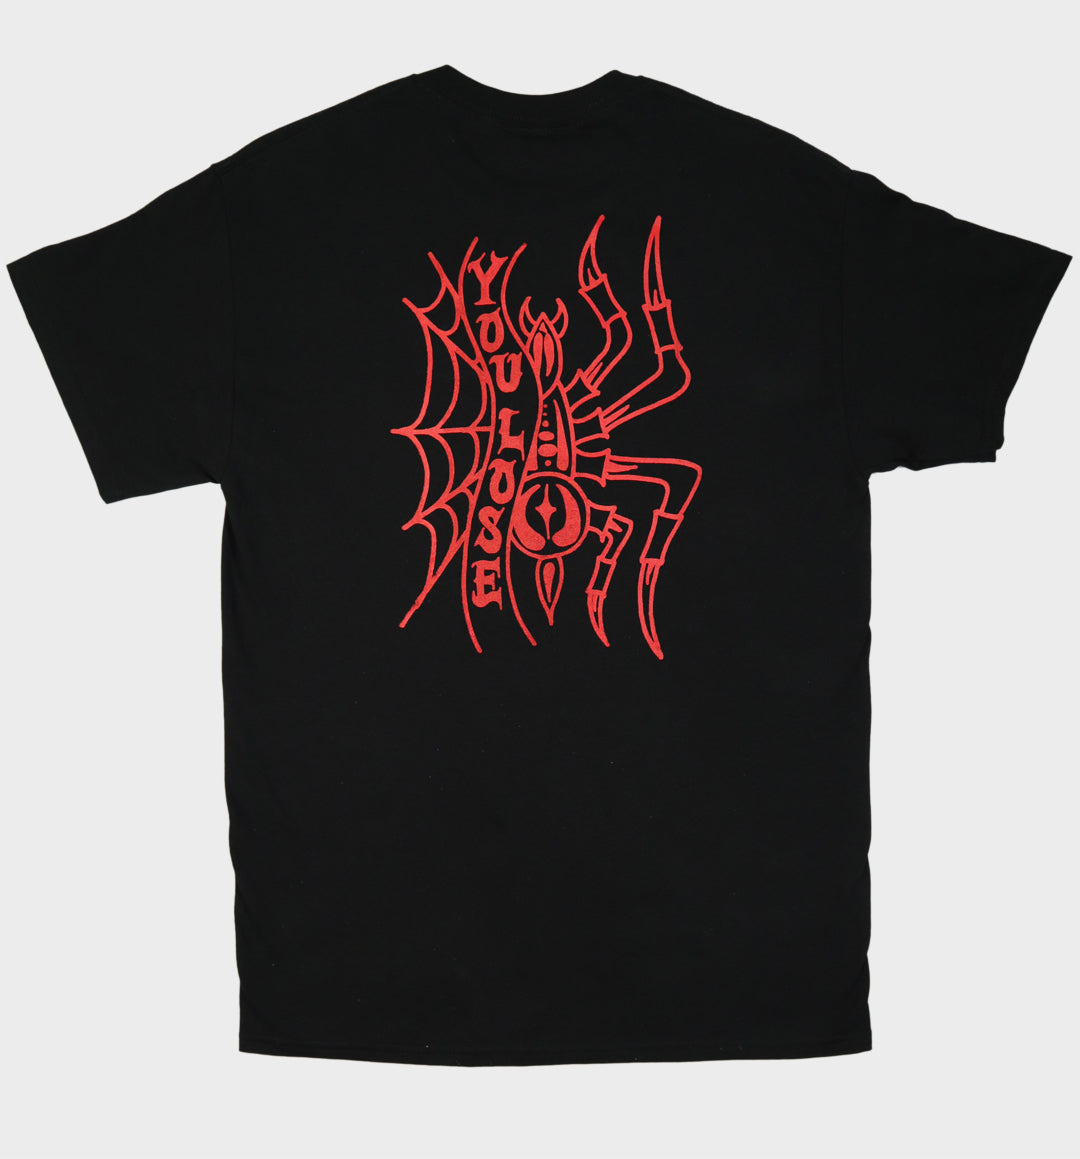 YOU LOSE SPIDER T-SHIRT